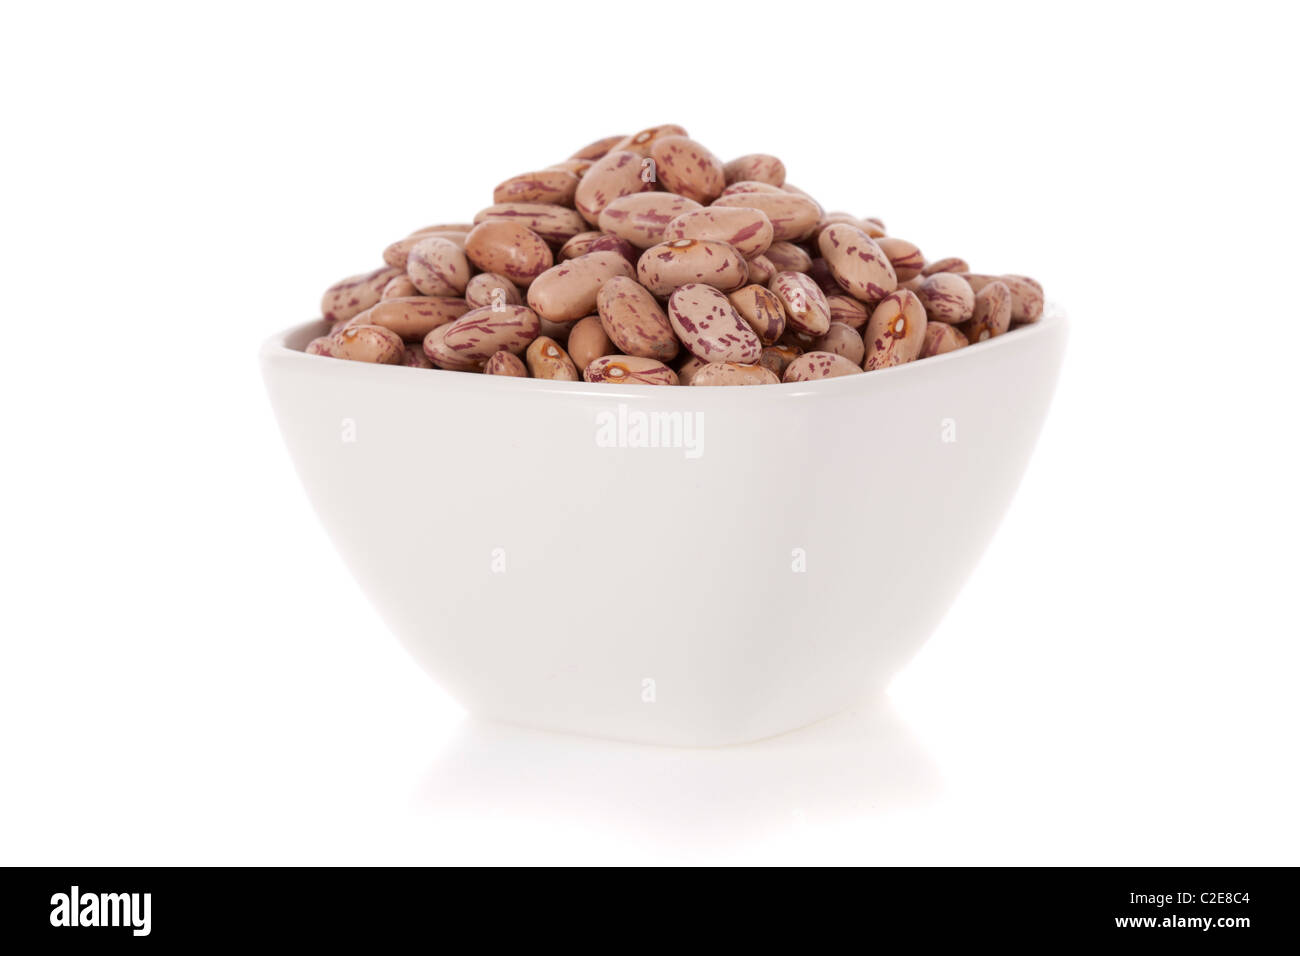 Pinto beans in a bowl isolated on a white background Stock Photo